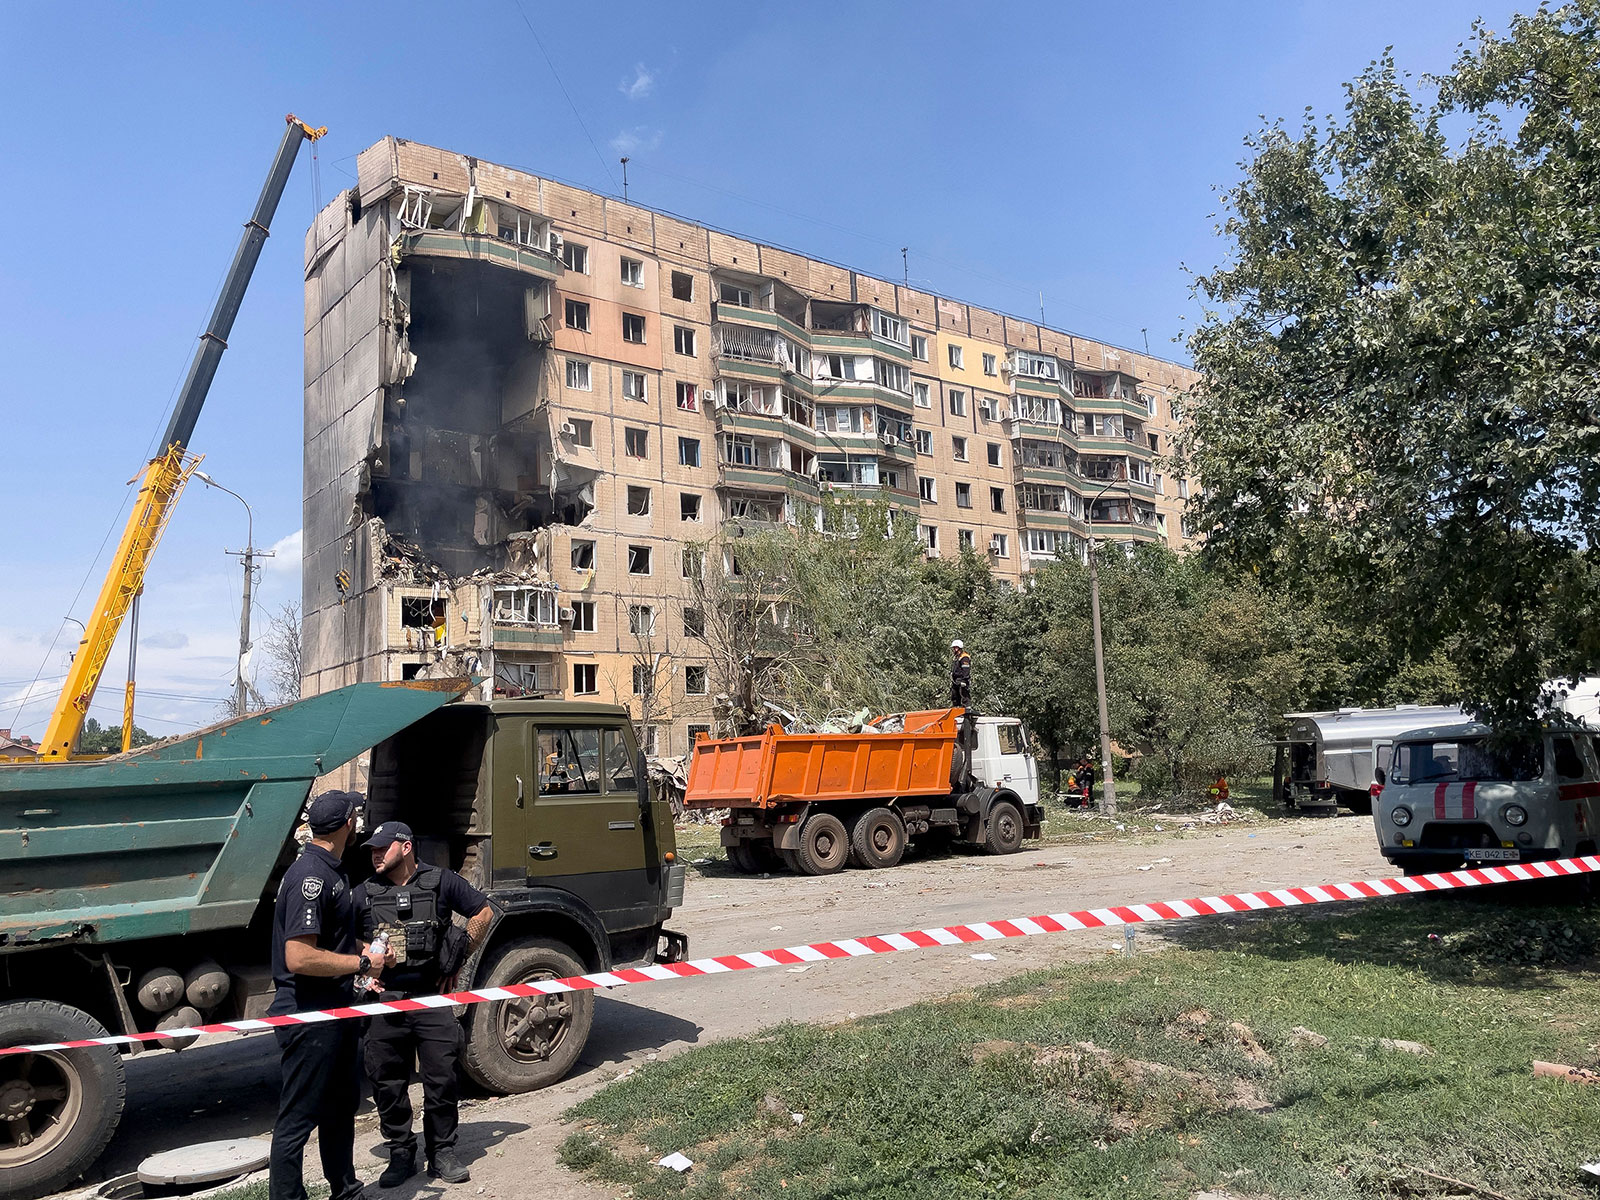 Police officers stand guard near a residential building partially destroyed as a result of a missile strike in Kryvyi Rih on Monday.